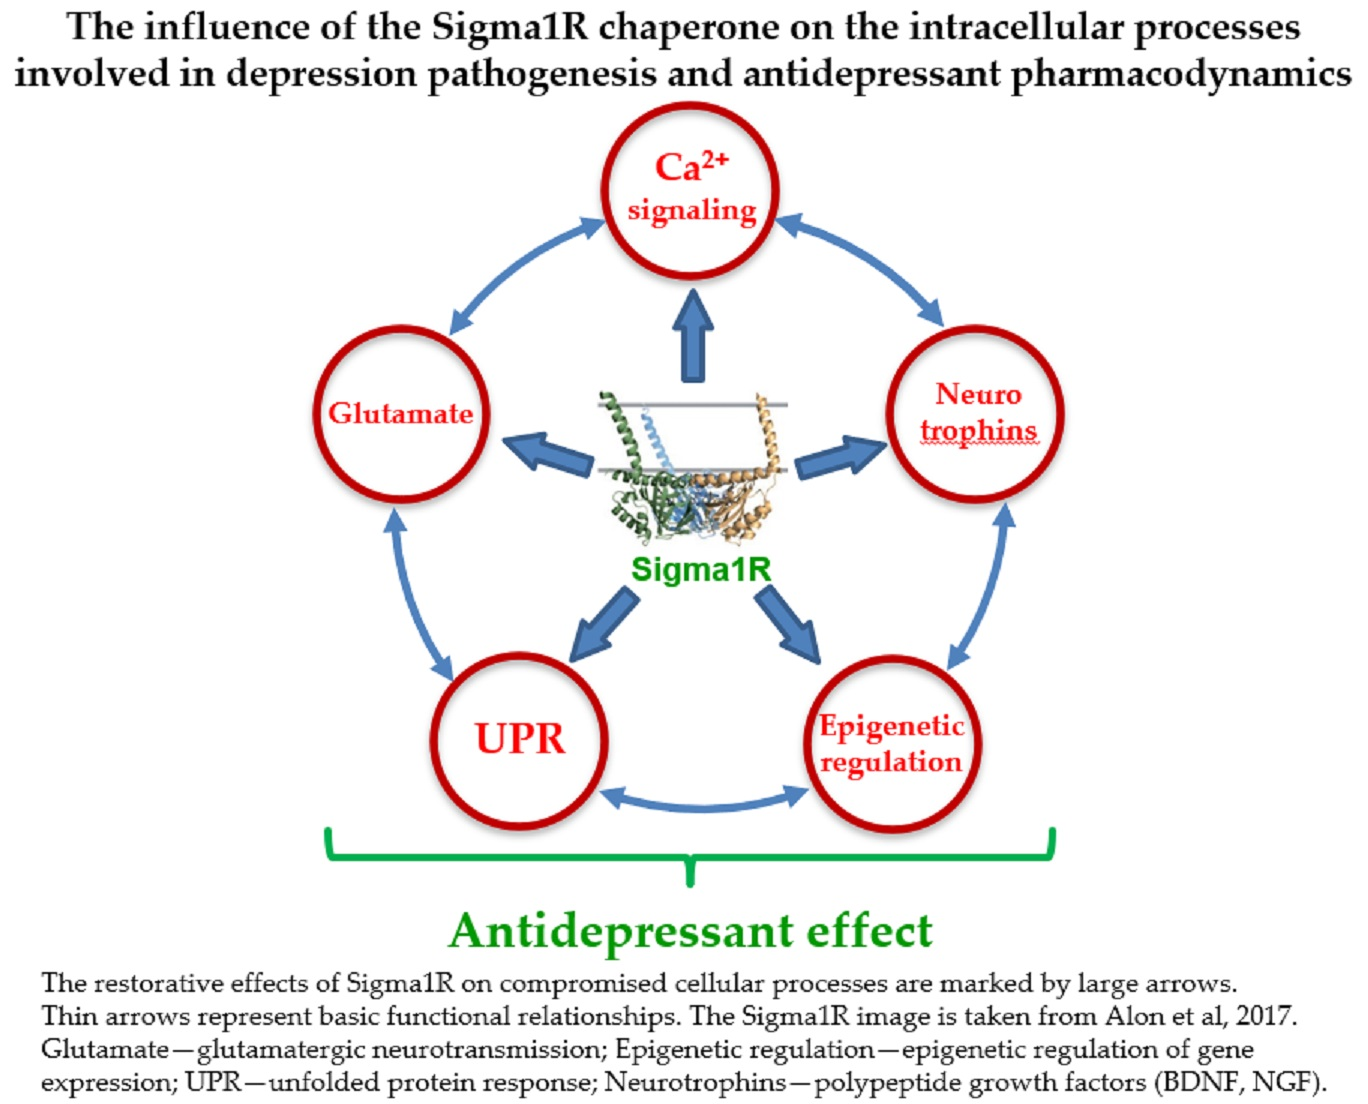 IJMS | Free Full-Text | Chaperone Sigma1R and Antidepressant Effect